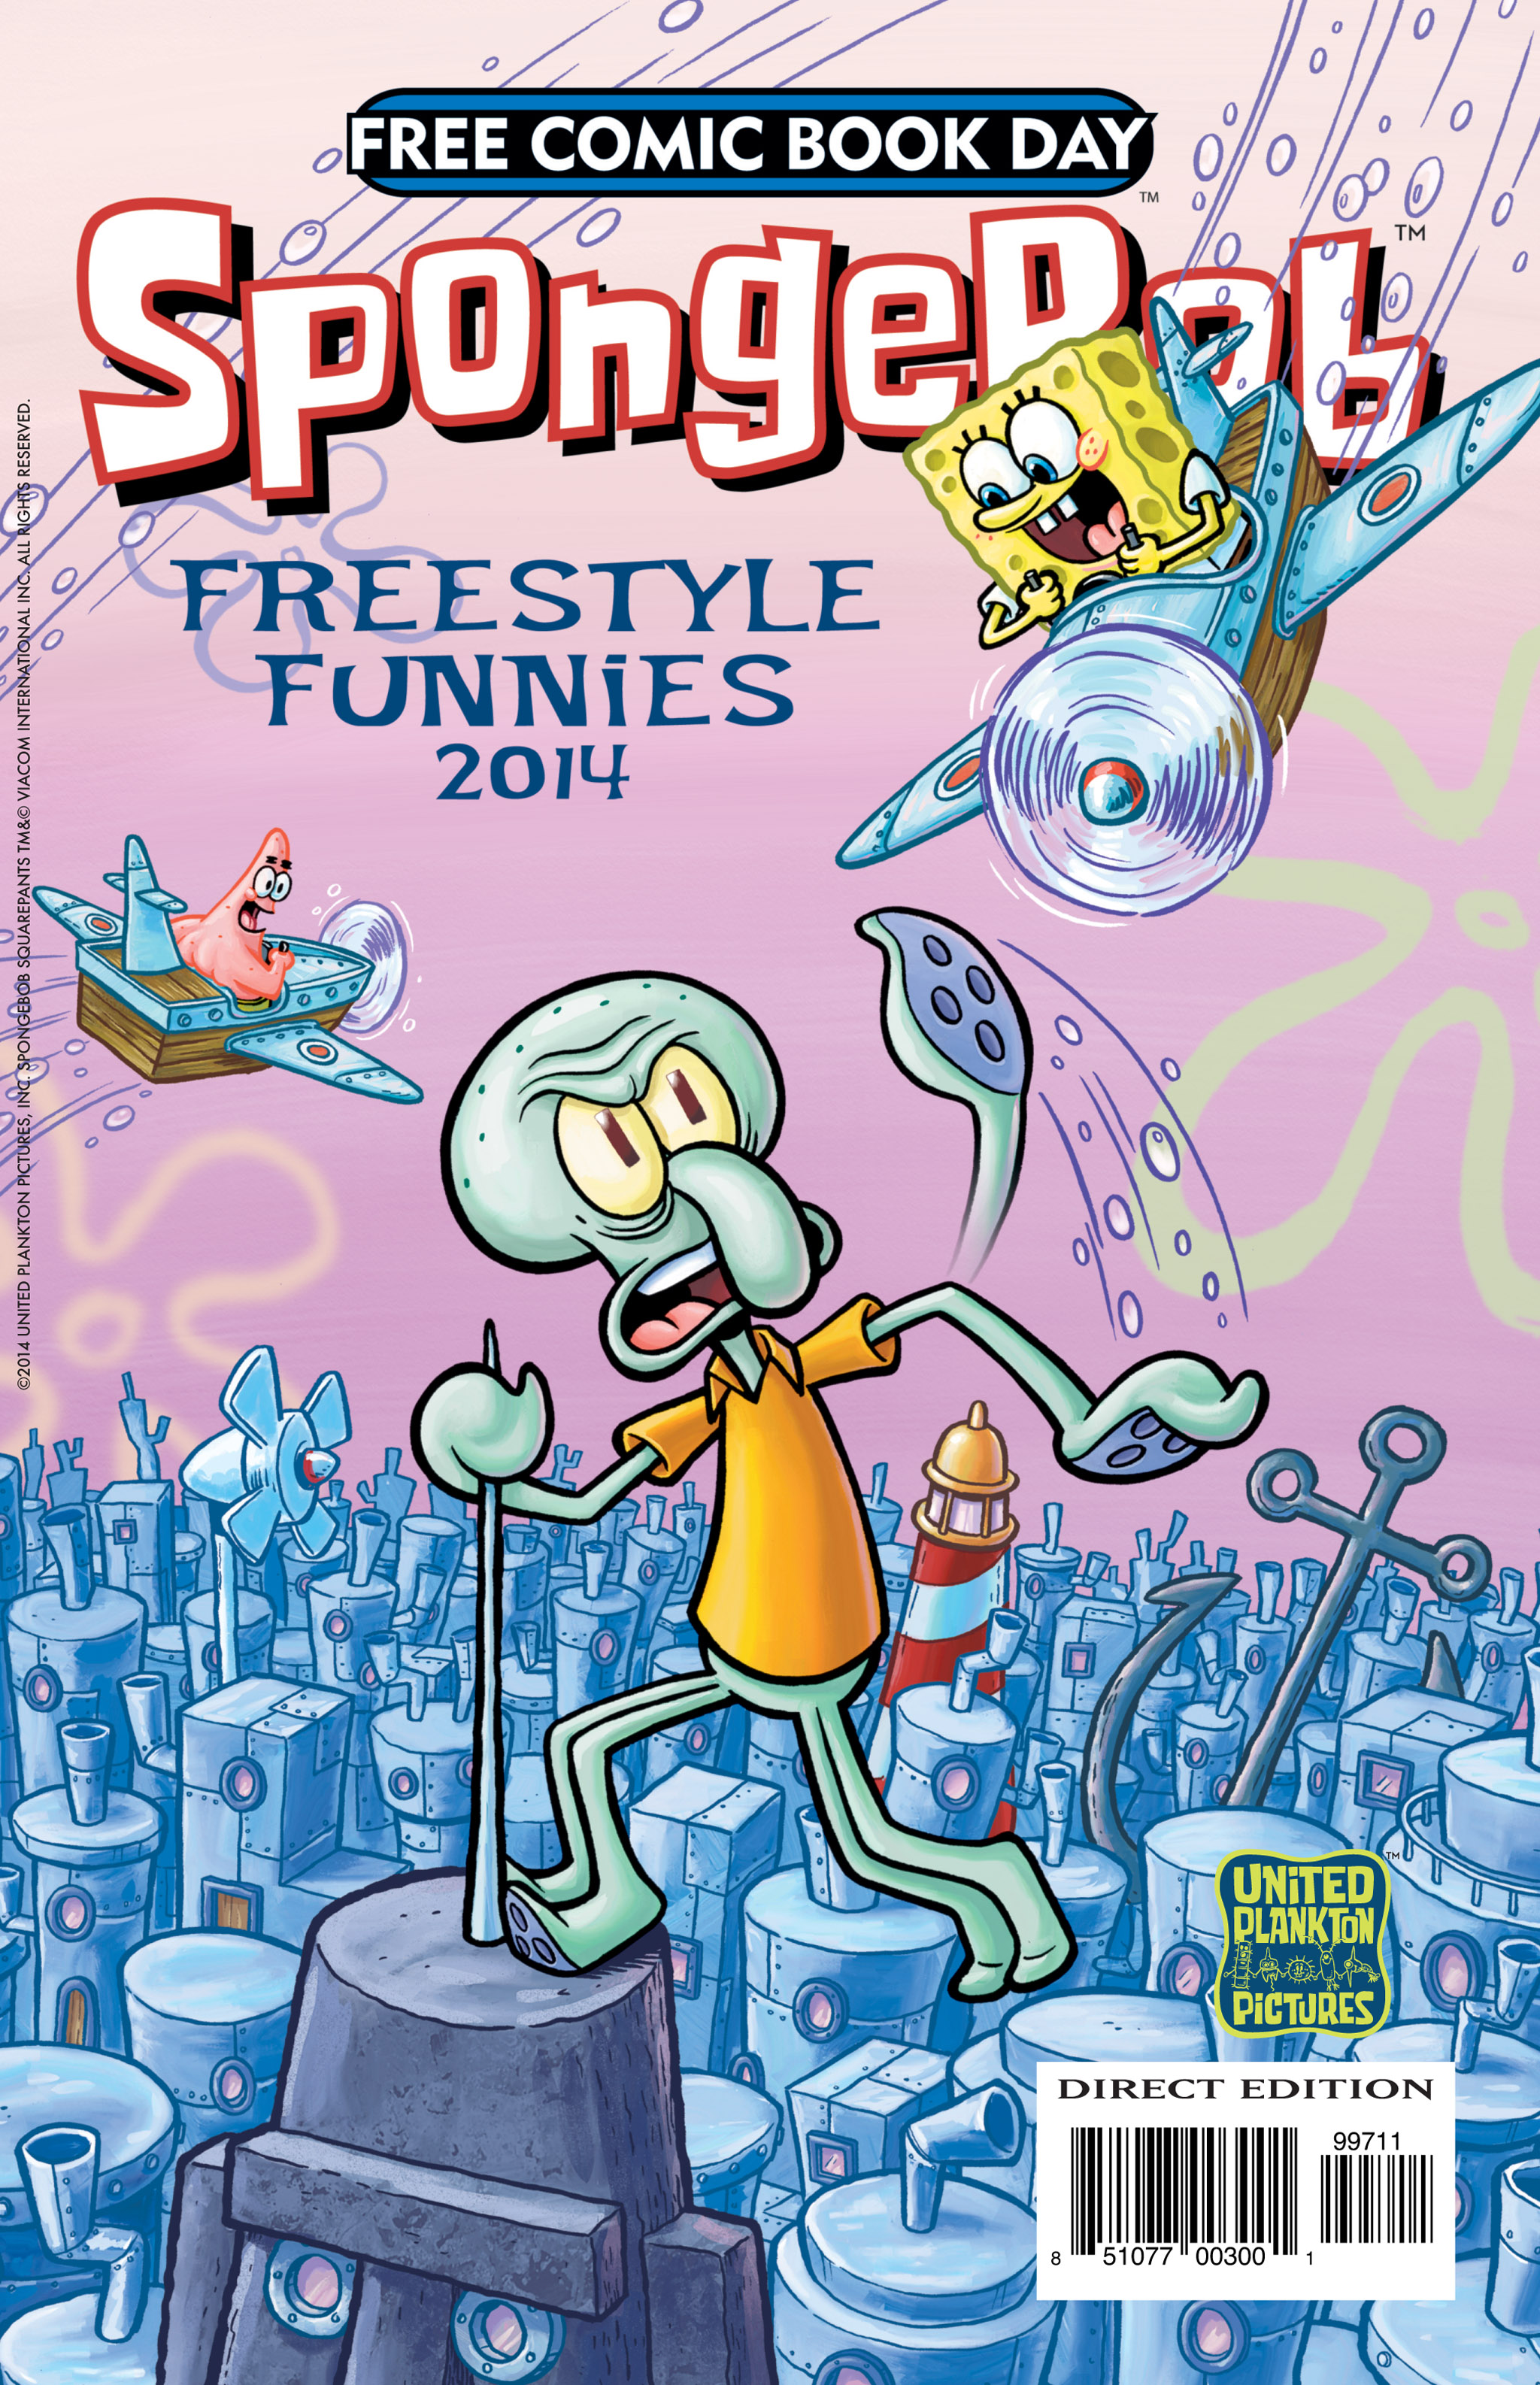 Free Comic Book Day 2014: Freestyle Funnies